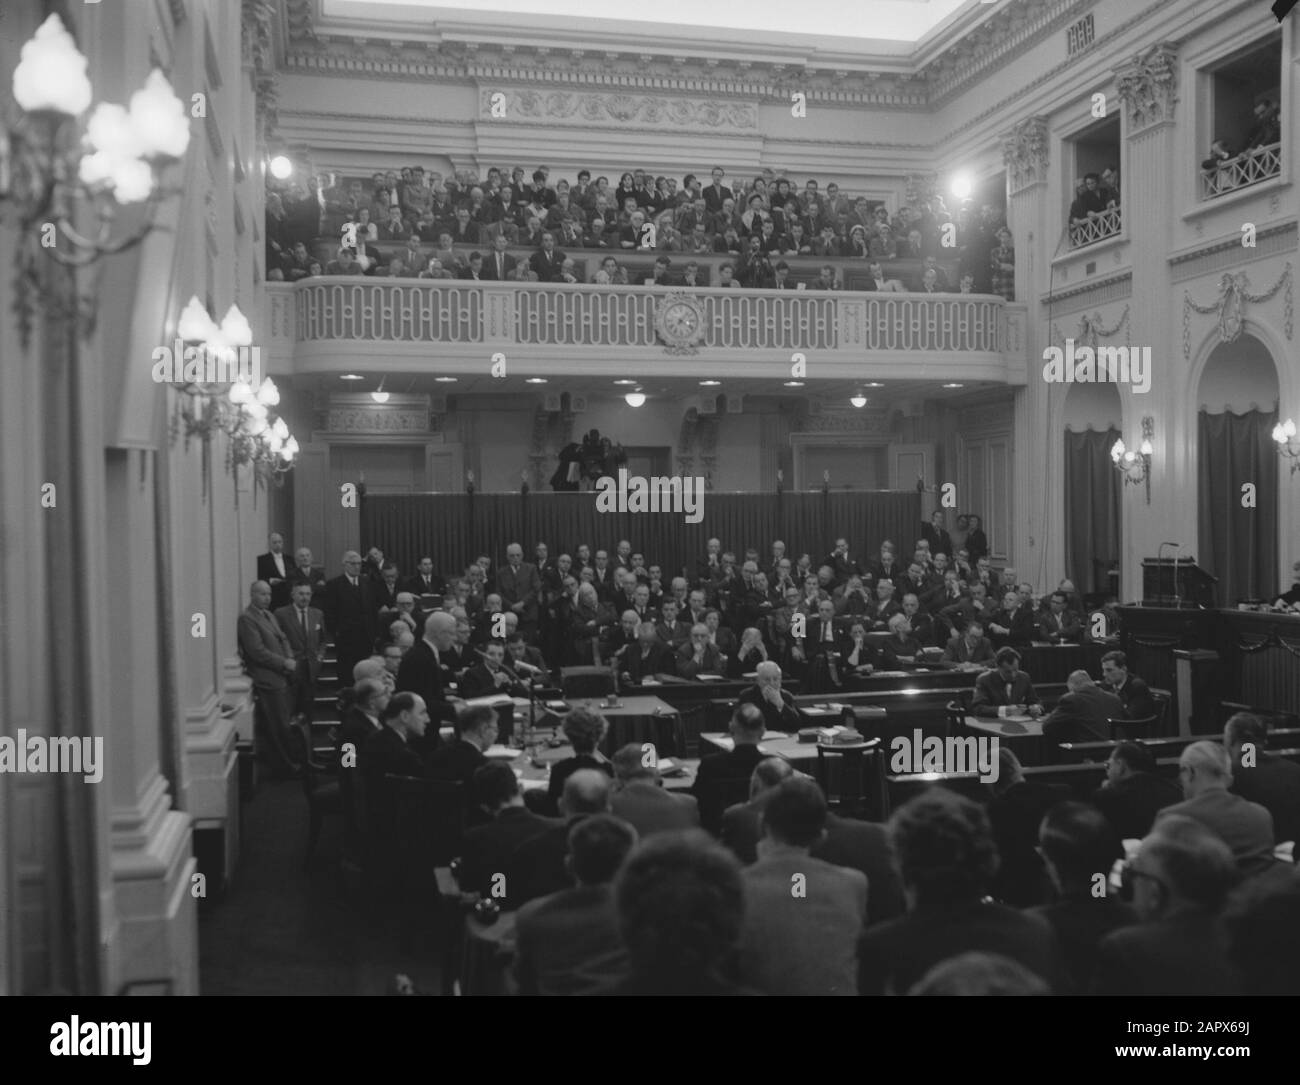 Crowded meeting room Black and White Stock Photos & Images - Alamy